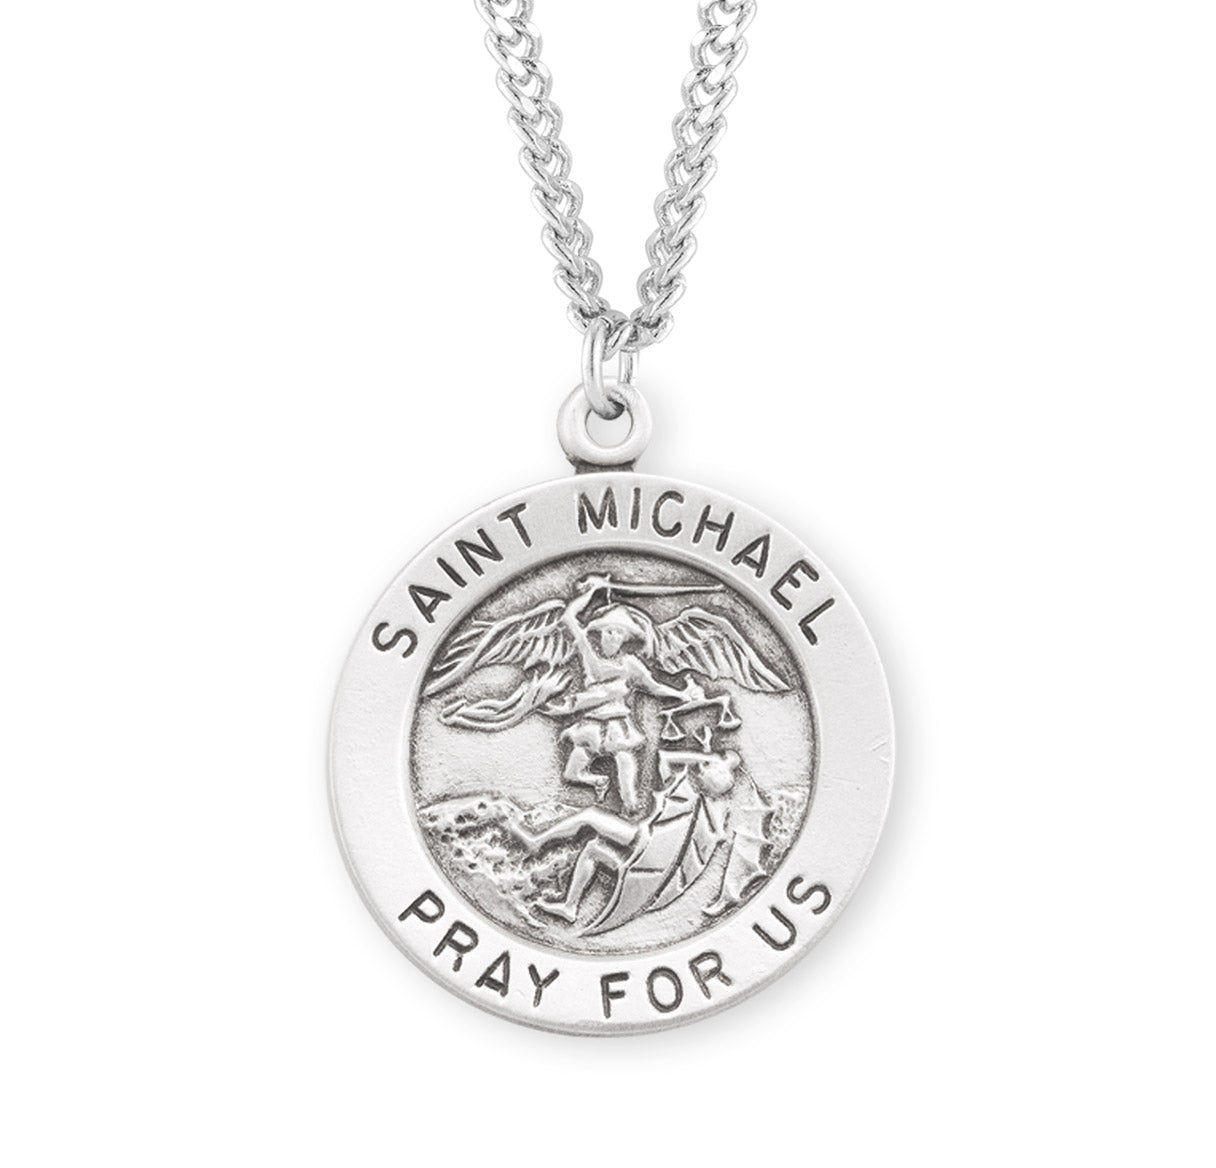 Patron Saint Michael the Archangel Round Sterling Silver Medal